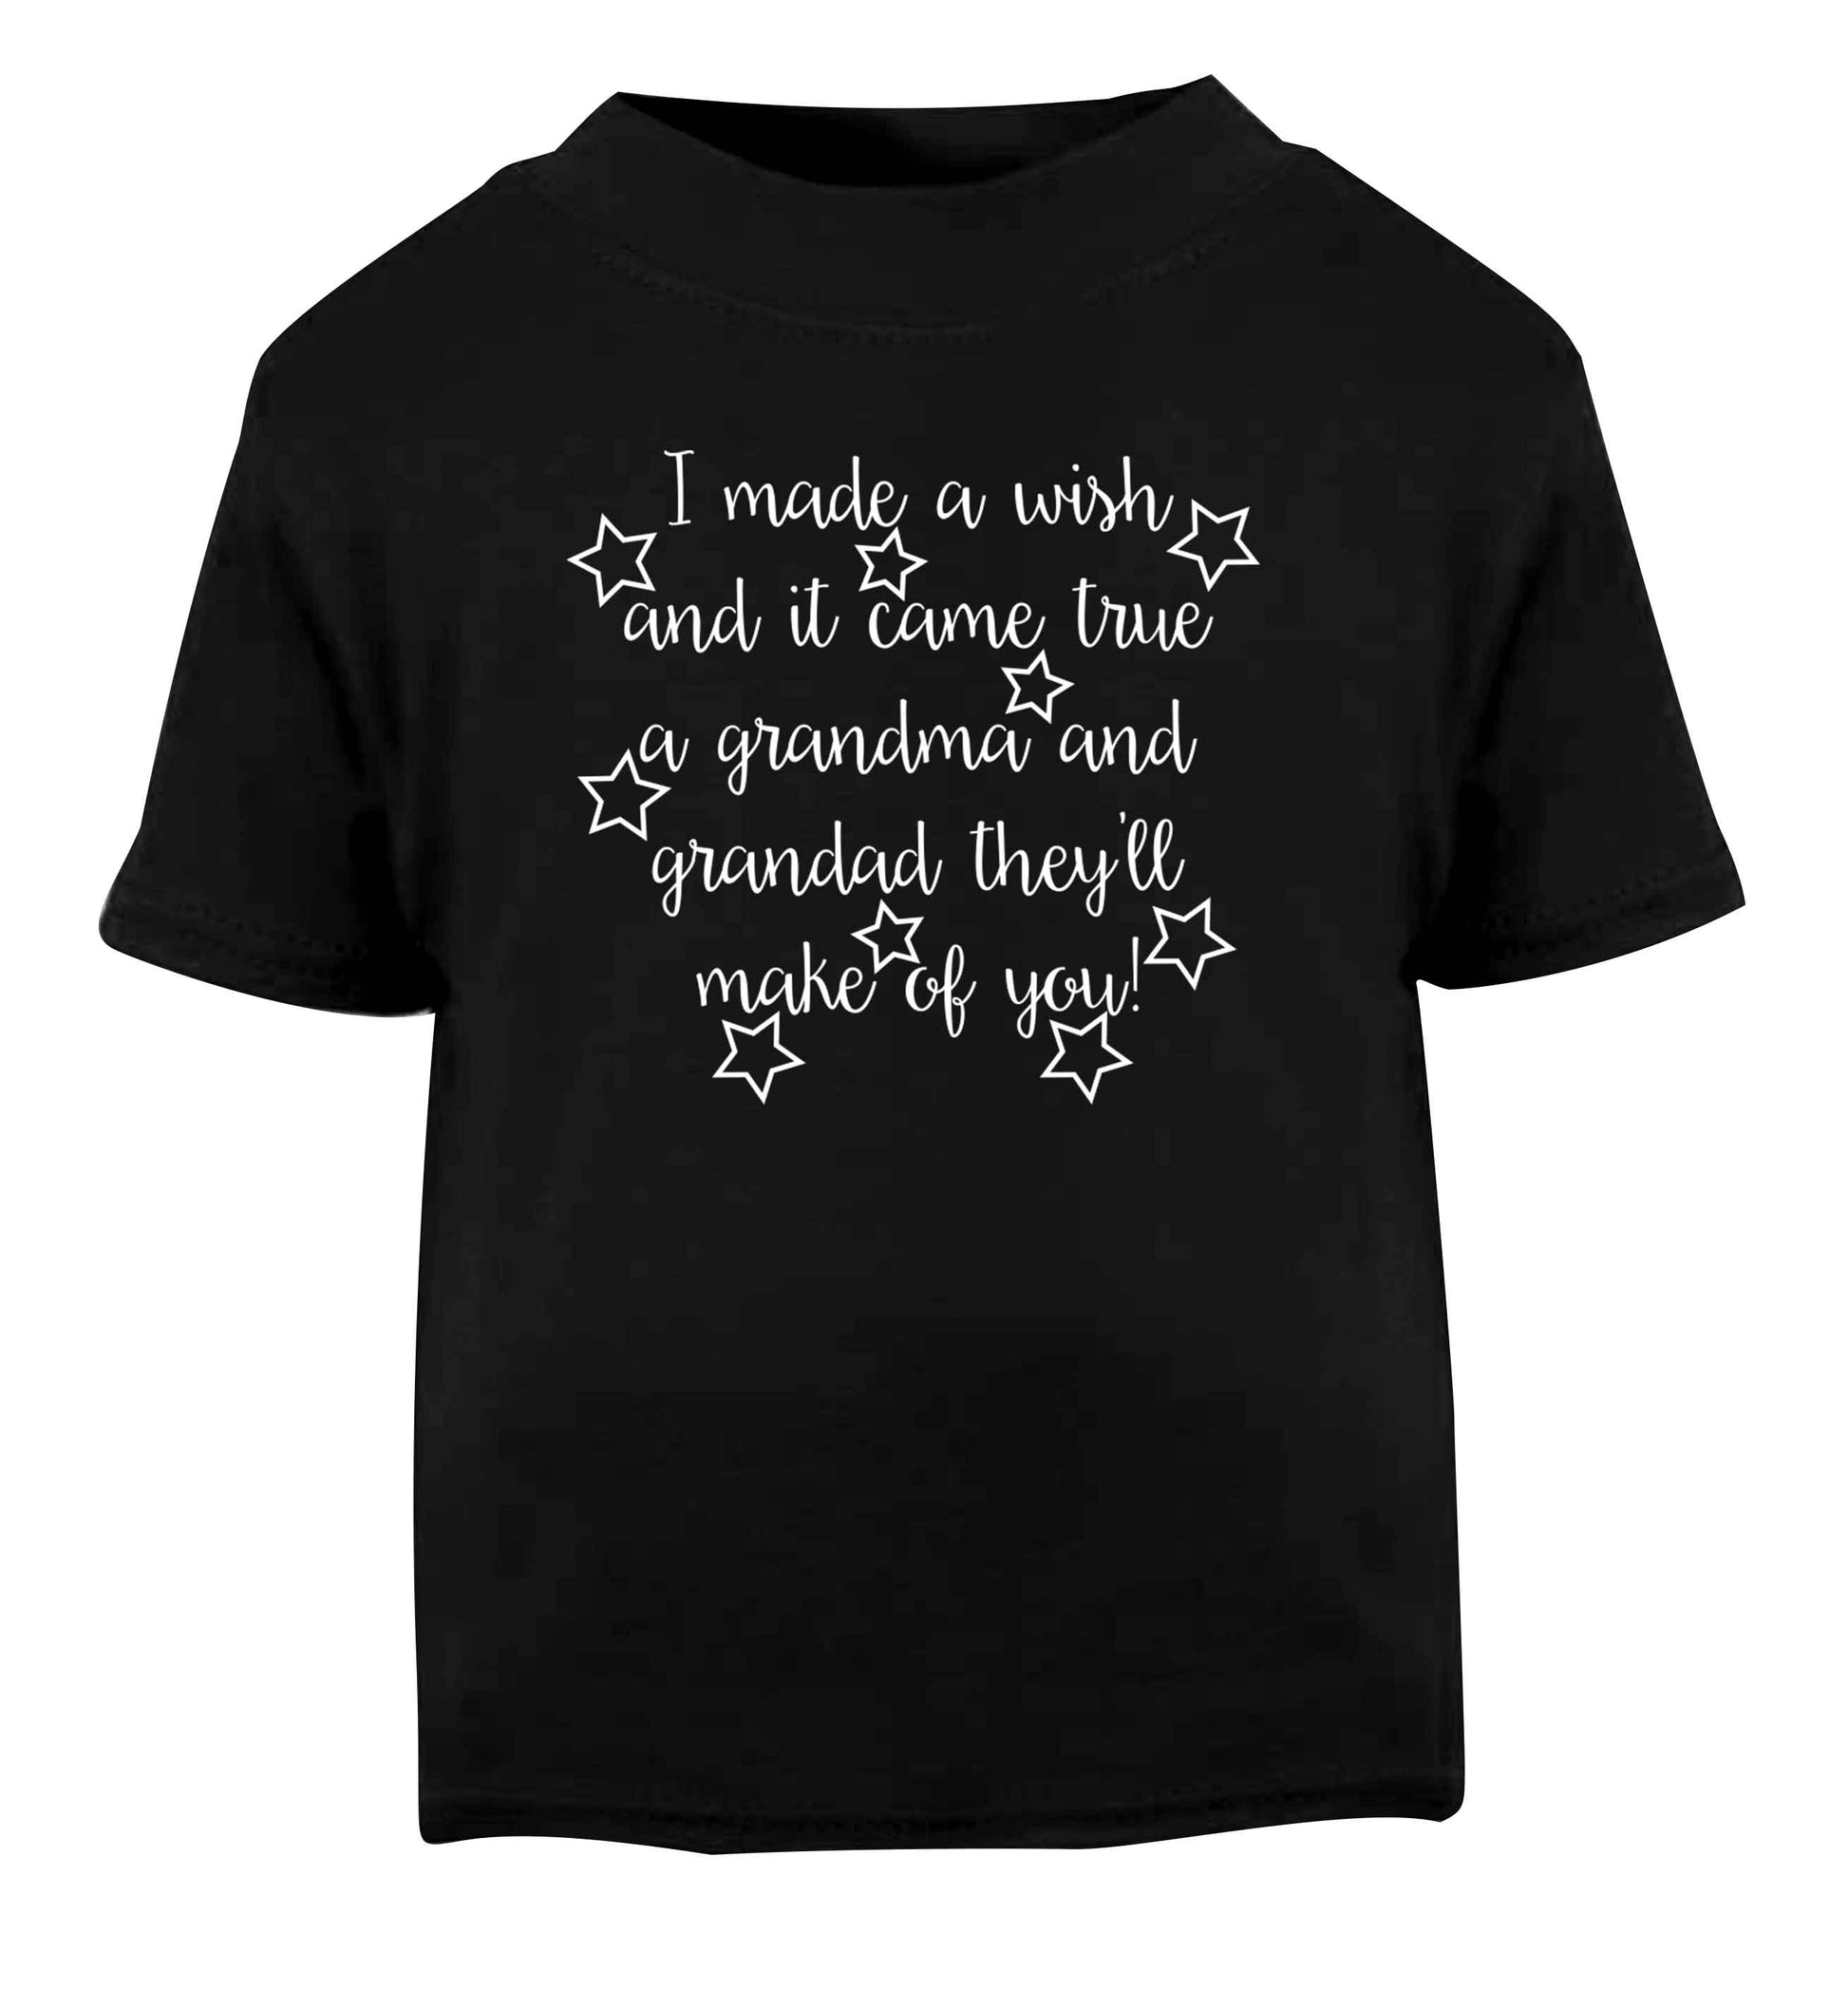 I made a wish and it came true a grandma and grandad they'll make of you! Black Baby Toddler Tshirt 2 years